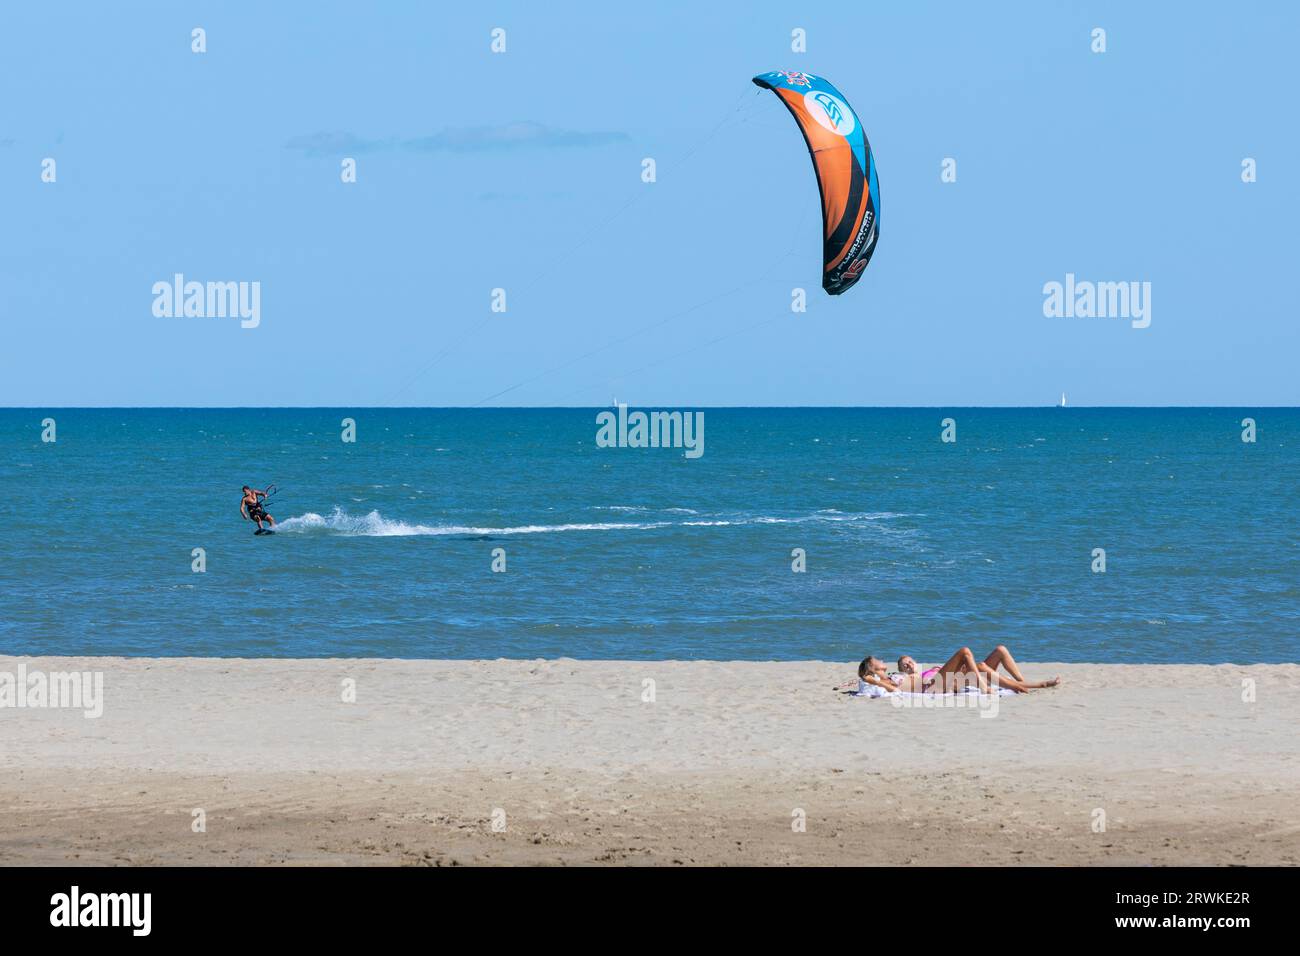 A kite surfer on the Mediterranean sea at La Franqui in the South of France Stock Photo